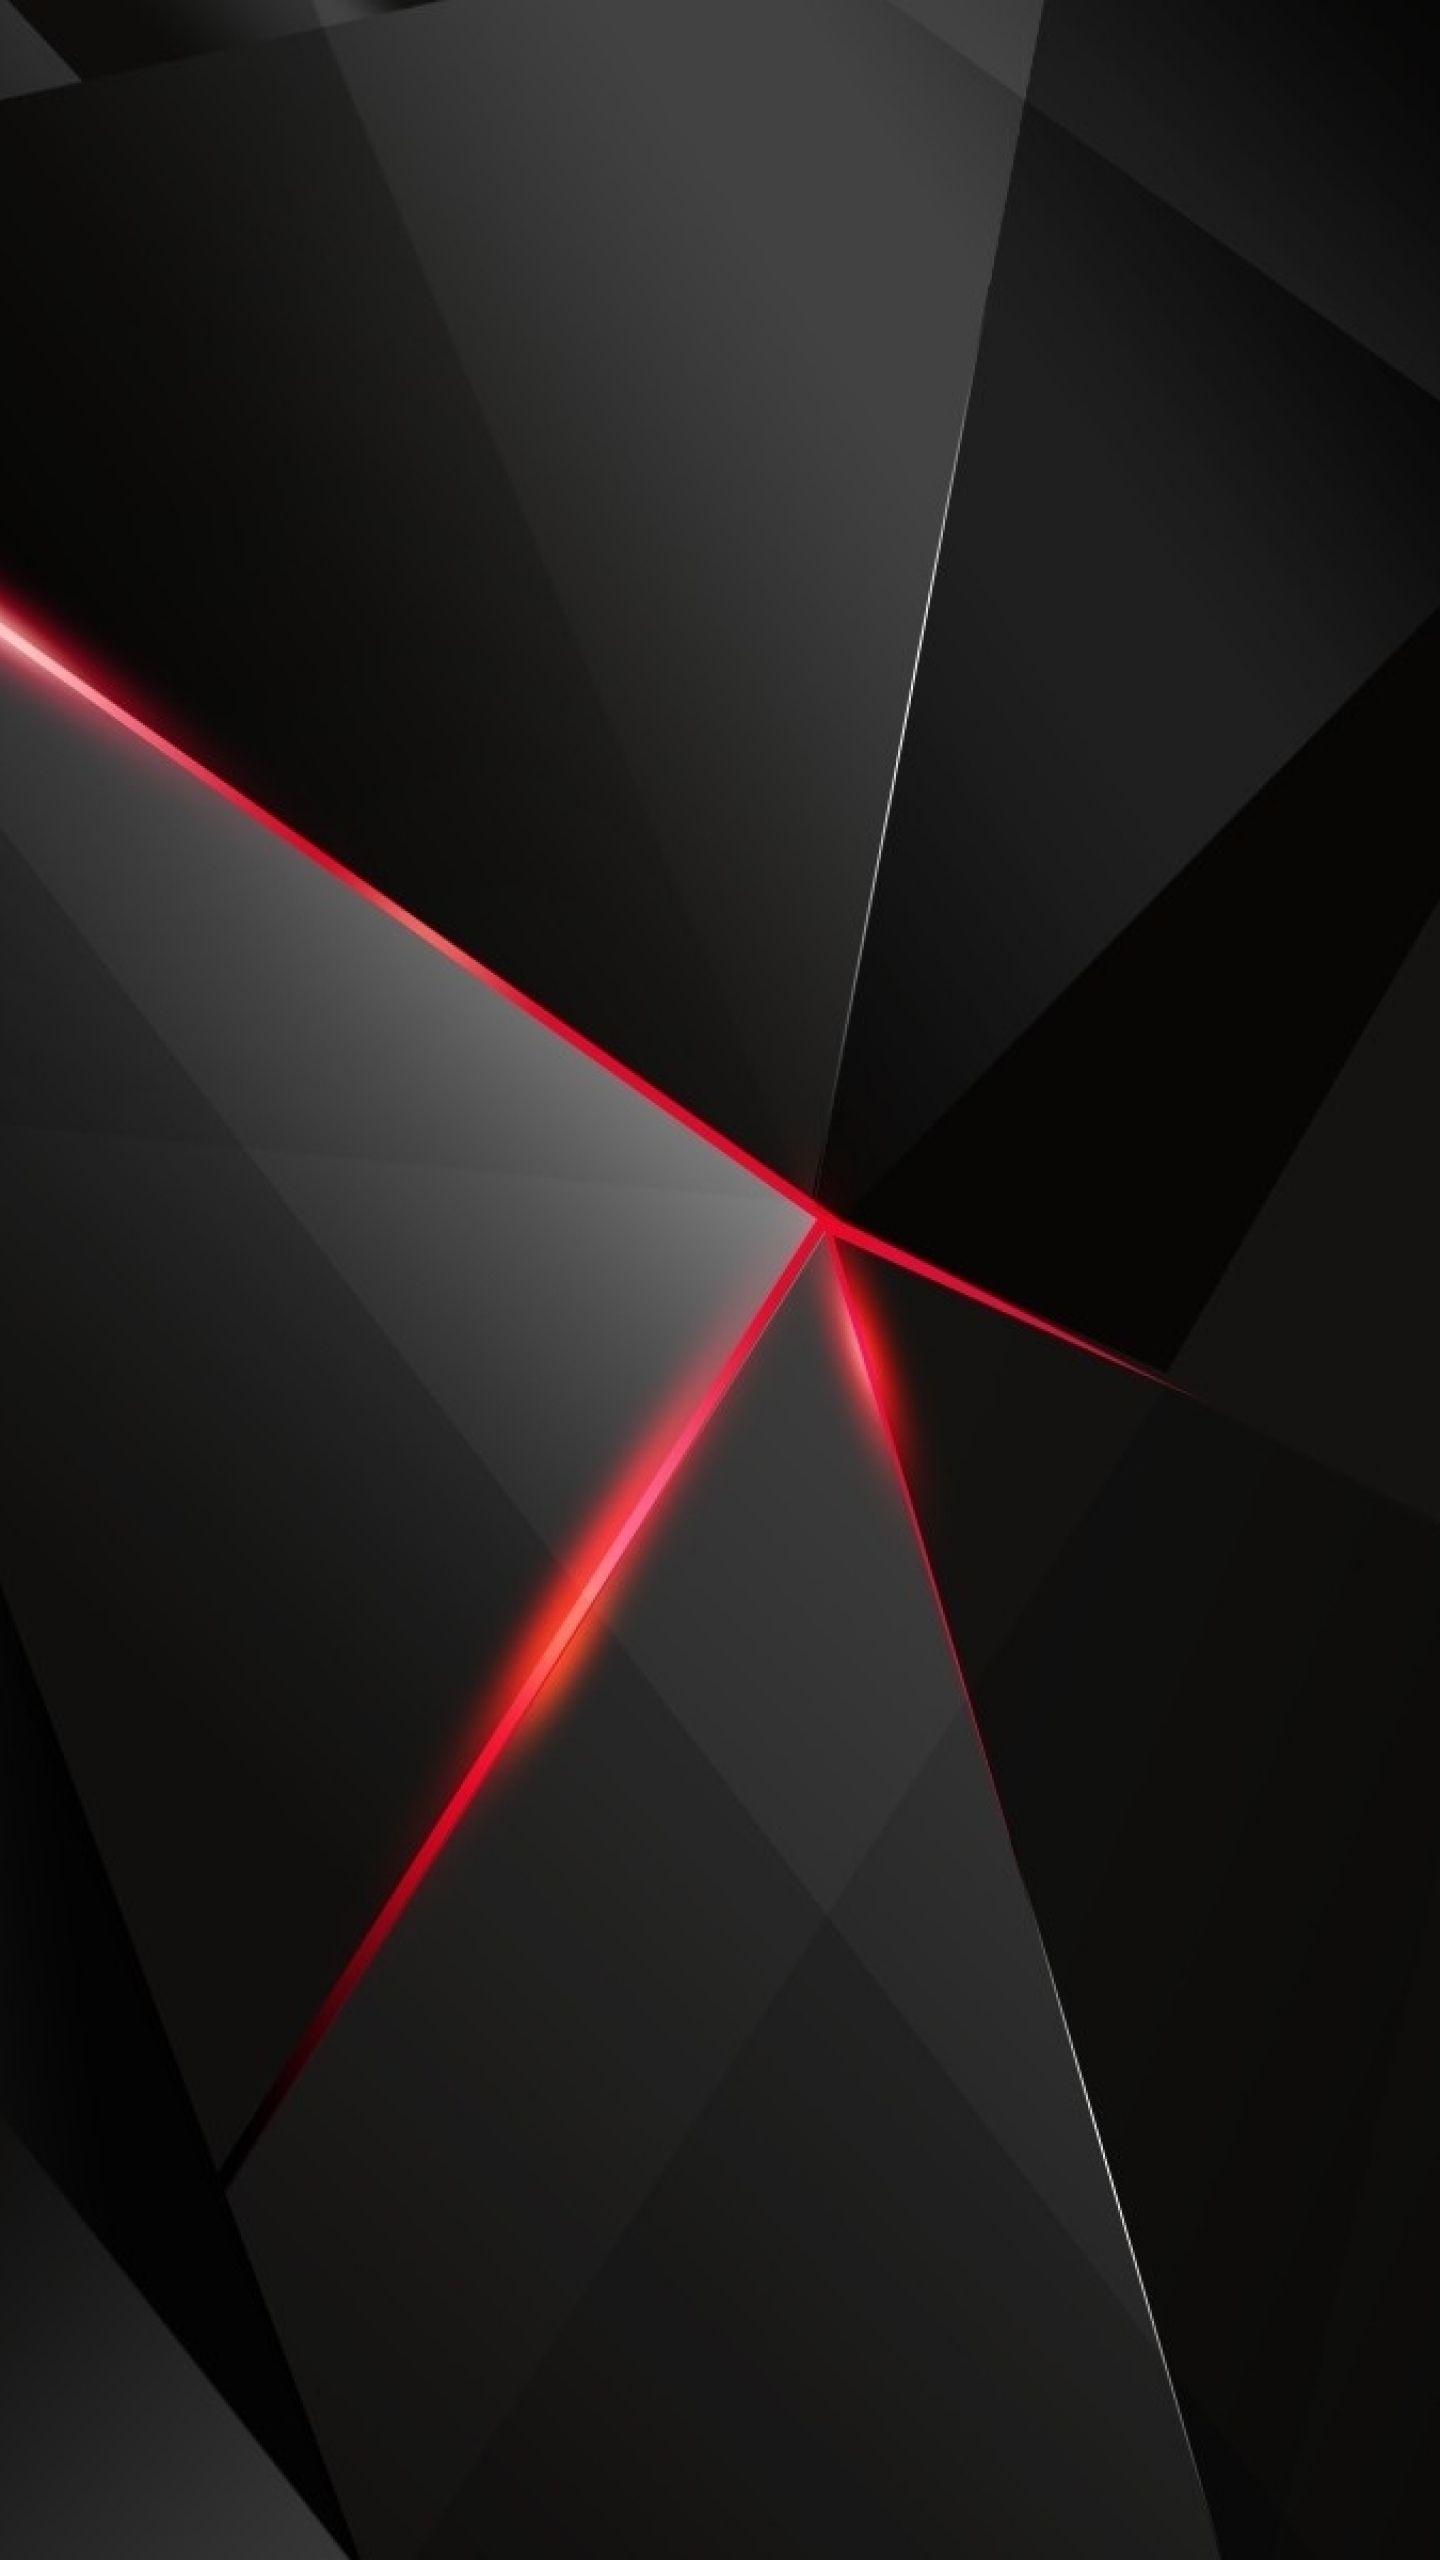 Pure Black Wallpaper. Android Central. Black wallpaper, Pure black wallpaper, Abstract wallpaper